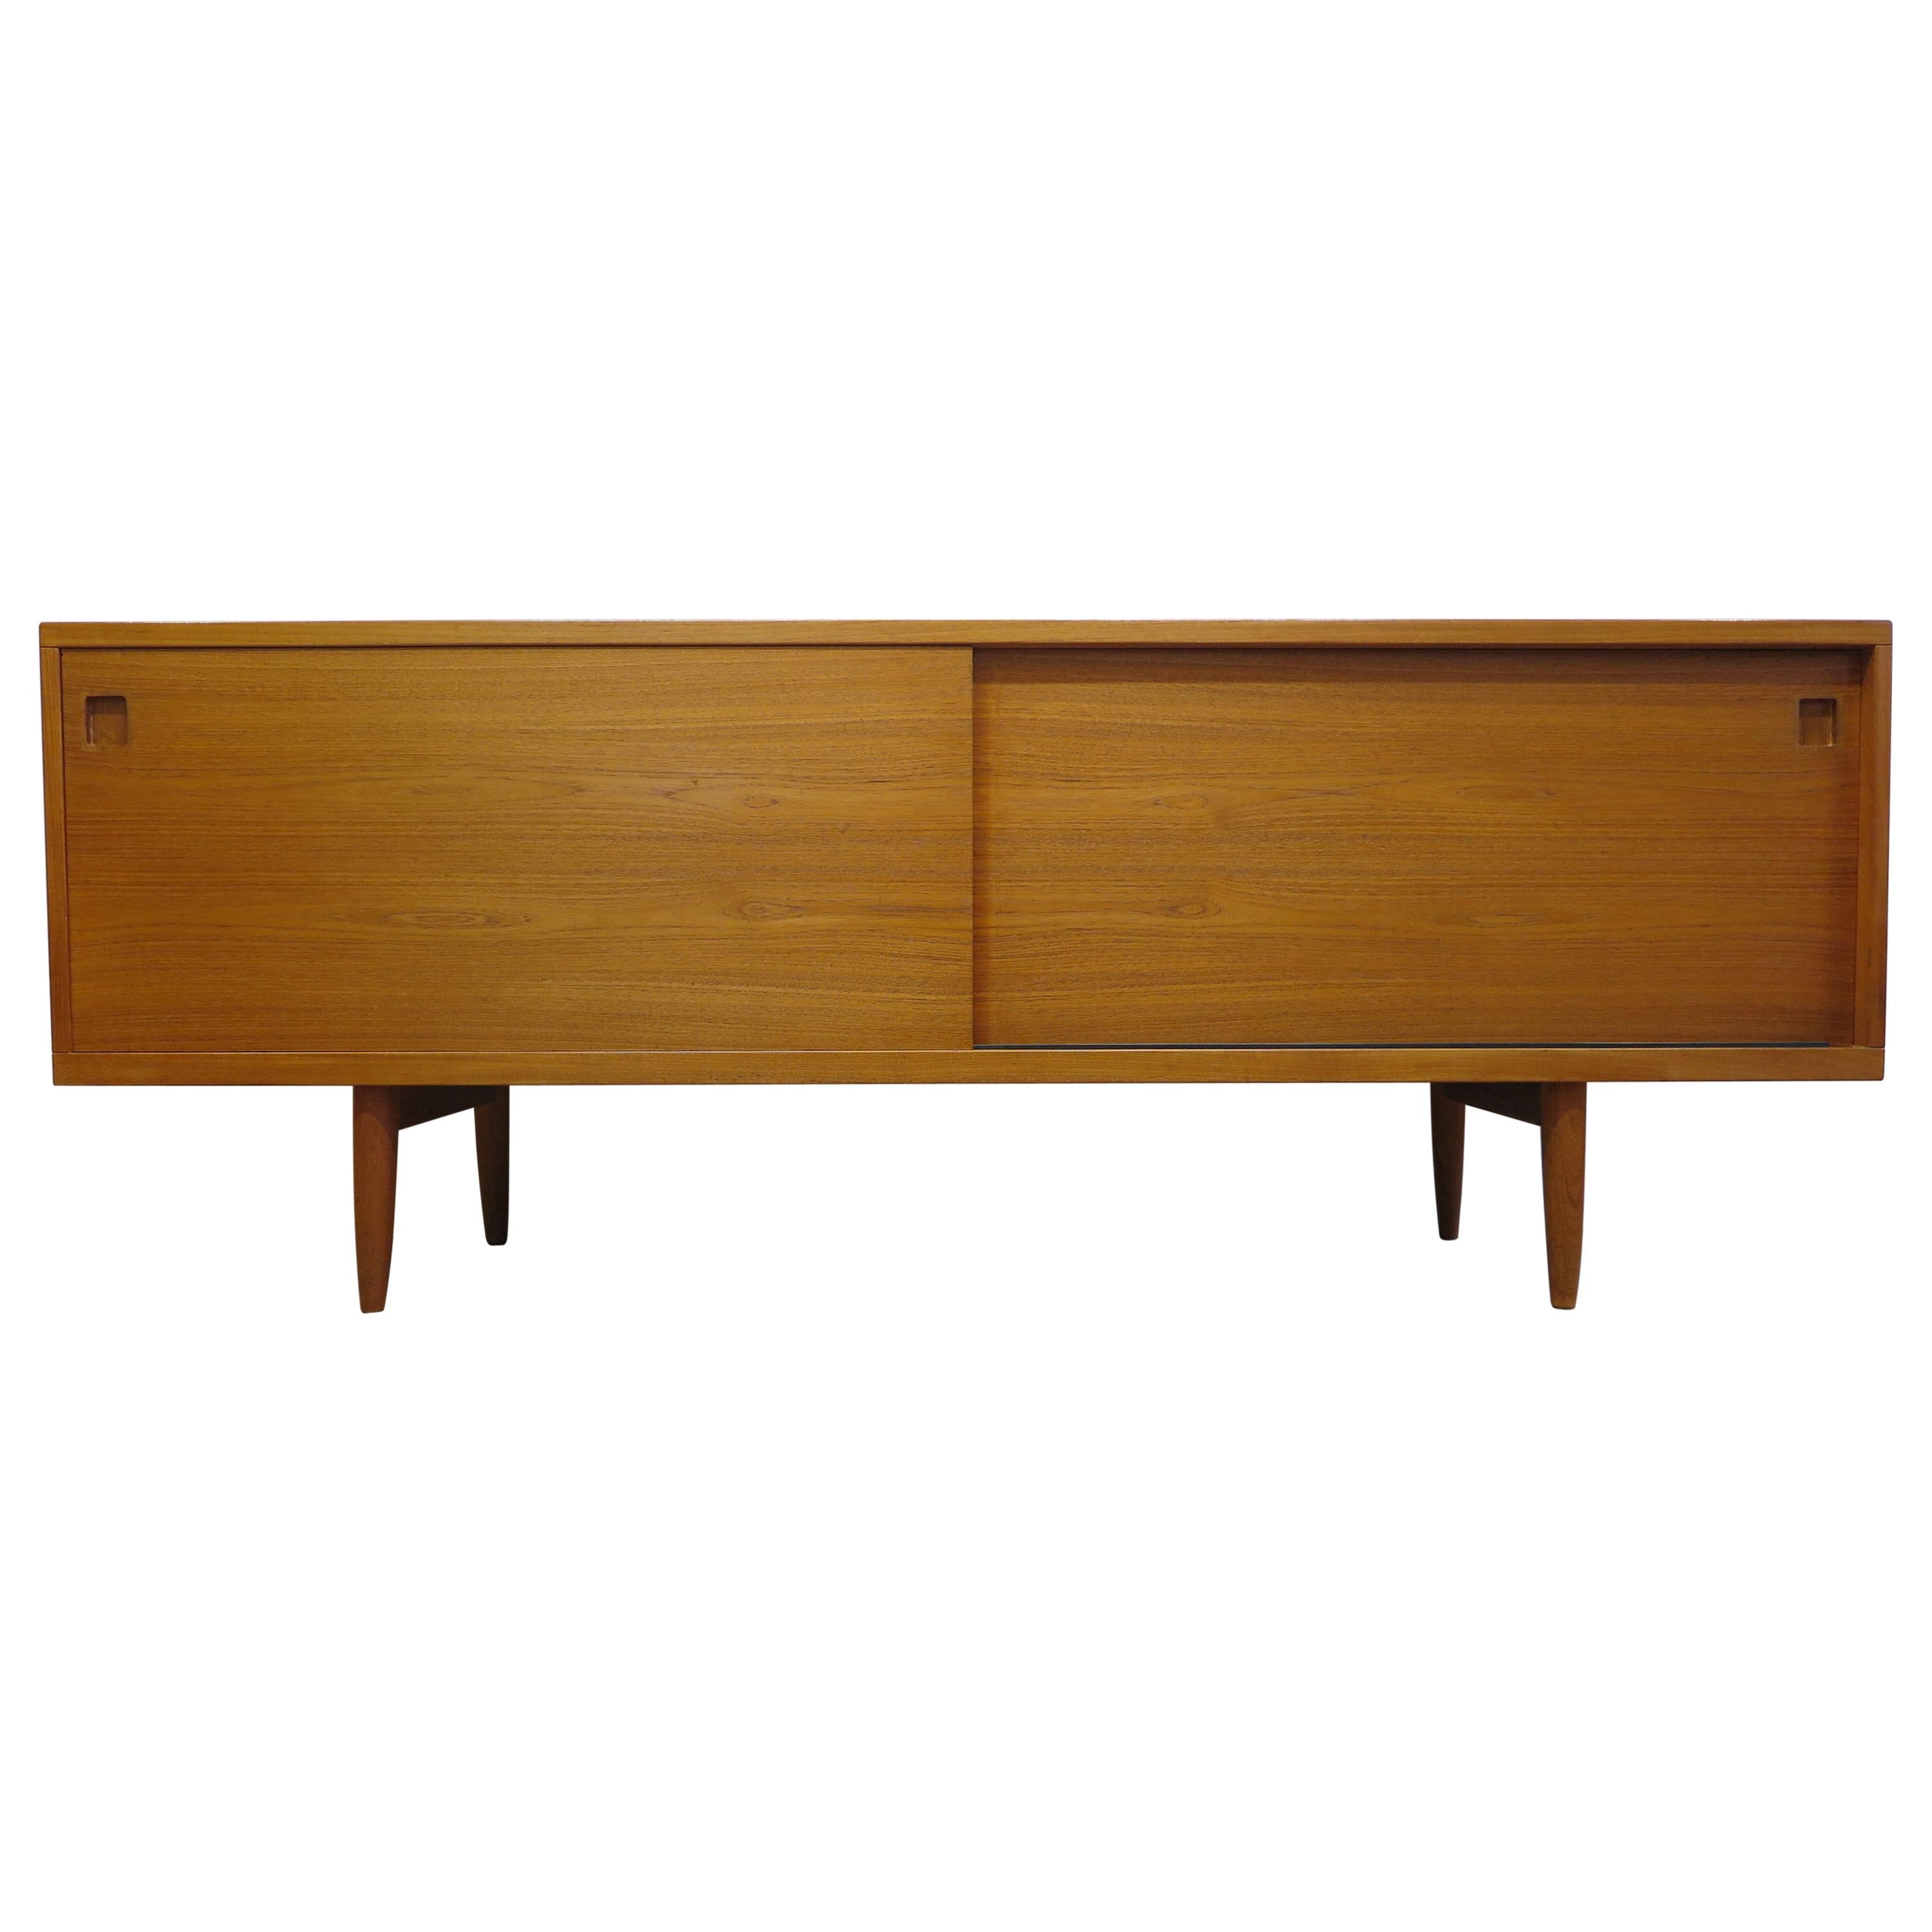 Rare Danish Credenza / Sideboard Model 20 by Niels Otto Moller 1950 ...